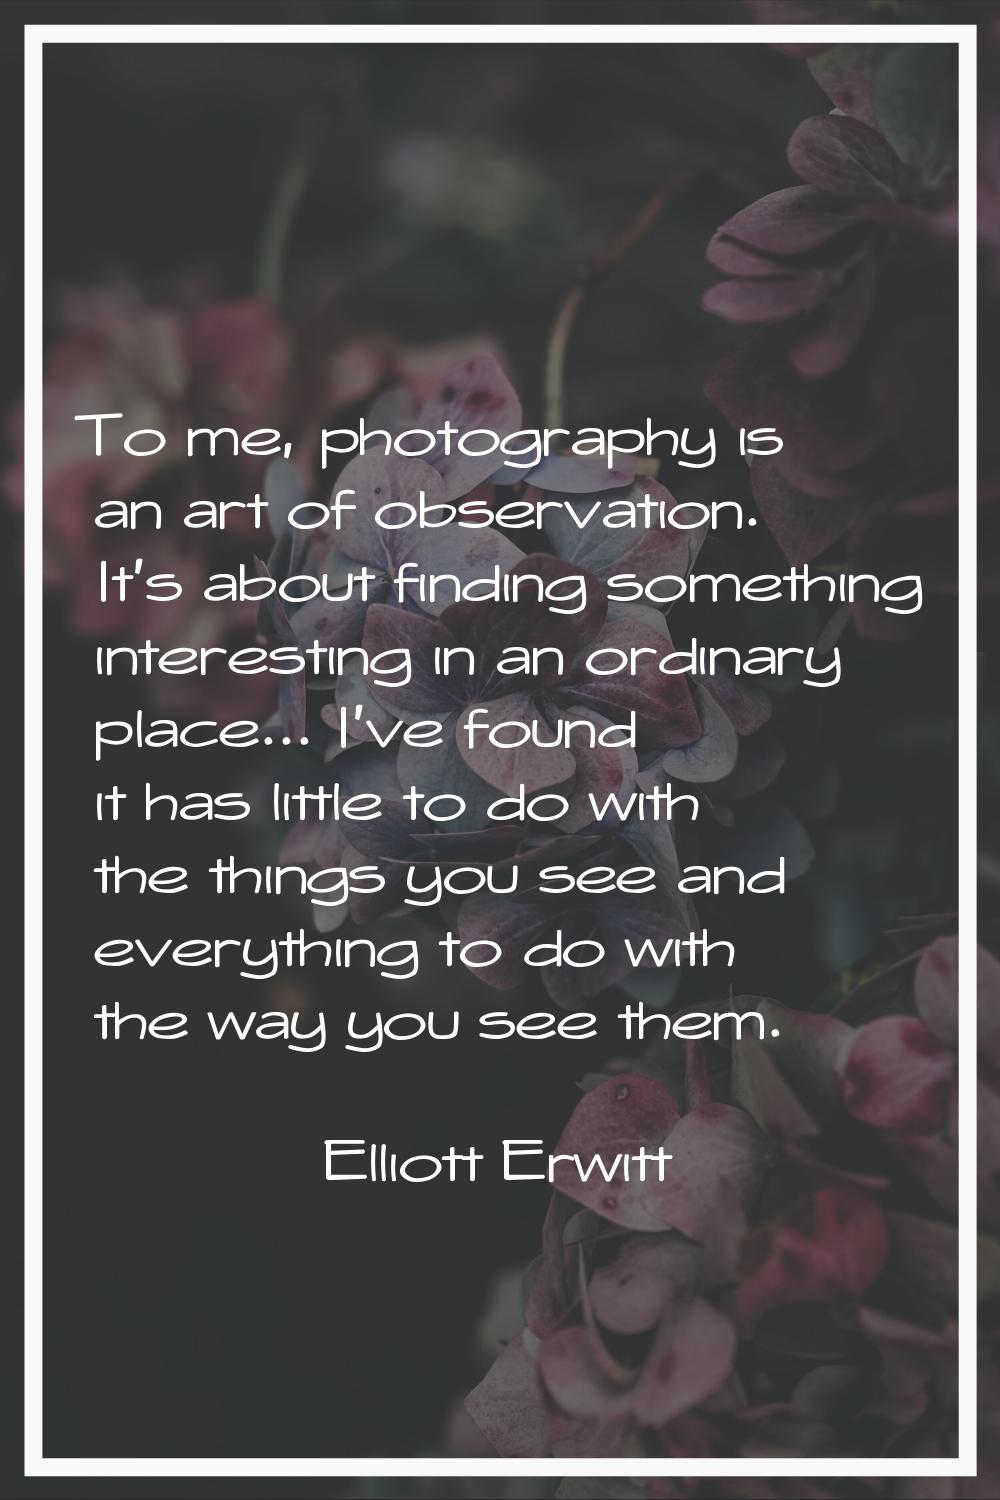 To me, photography is an art of observation. It's about finding something interesting in an ordinar